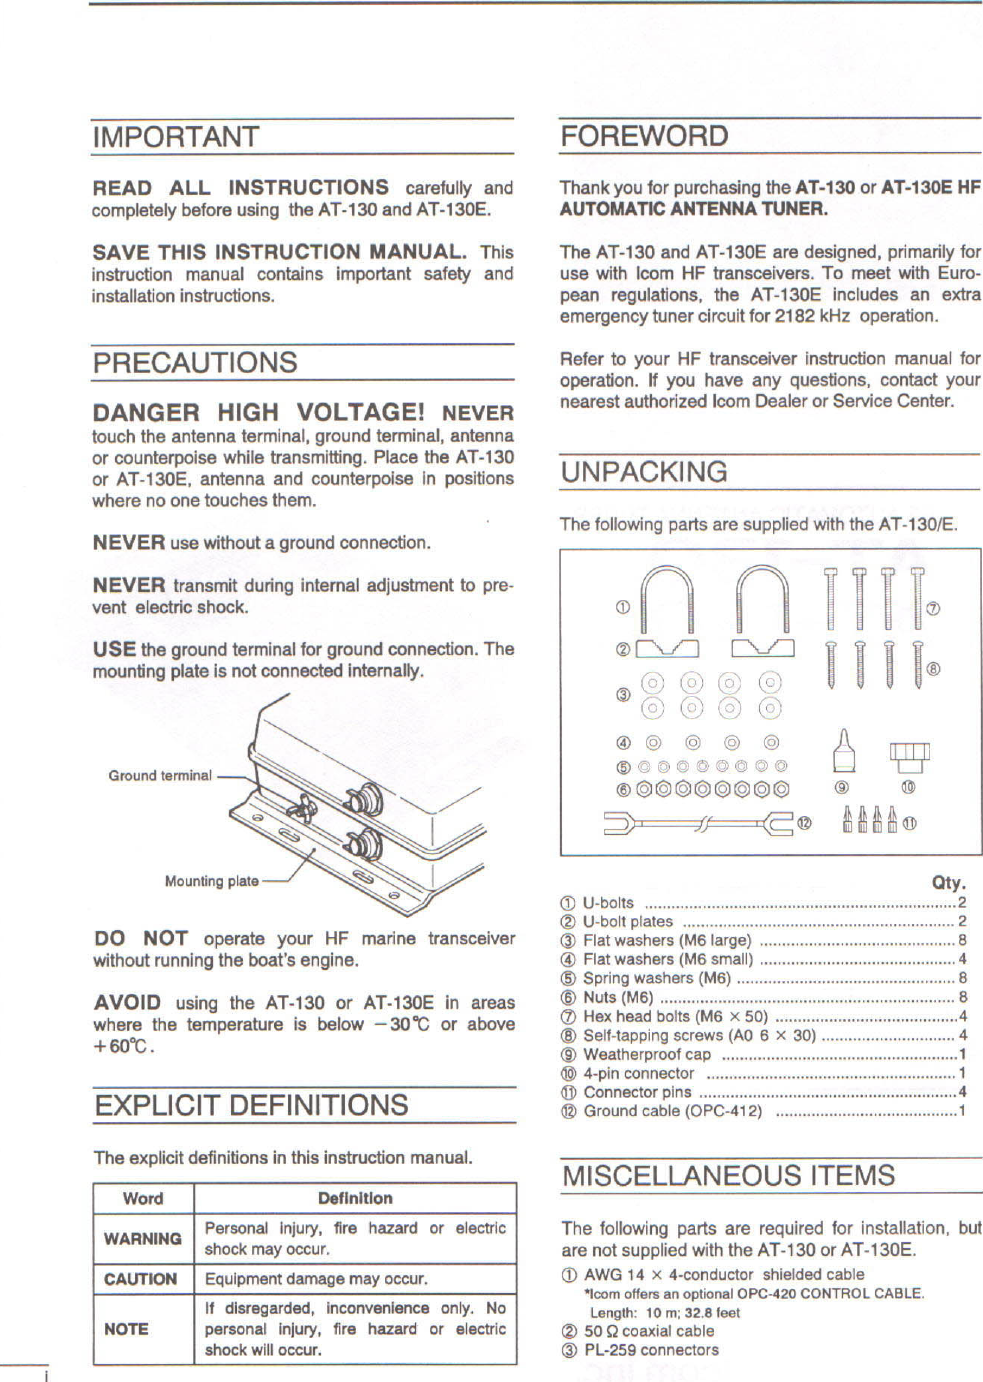 Page 2 of 12 - ICOM--AT-130-Auto-antenna-tuner-Manual